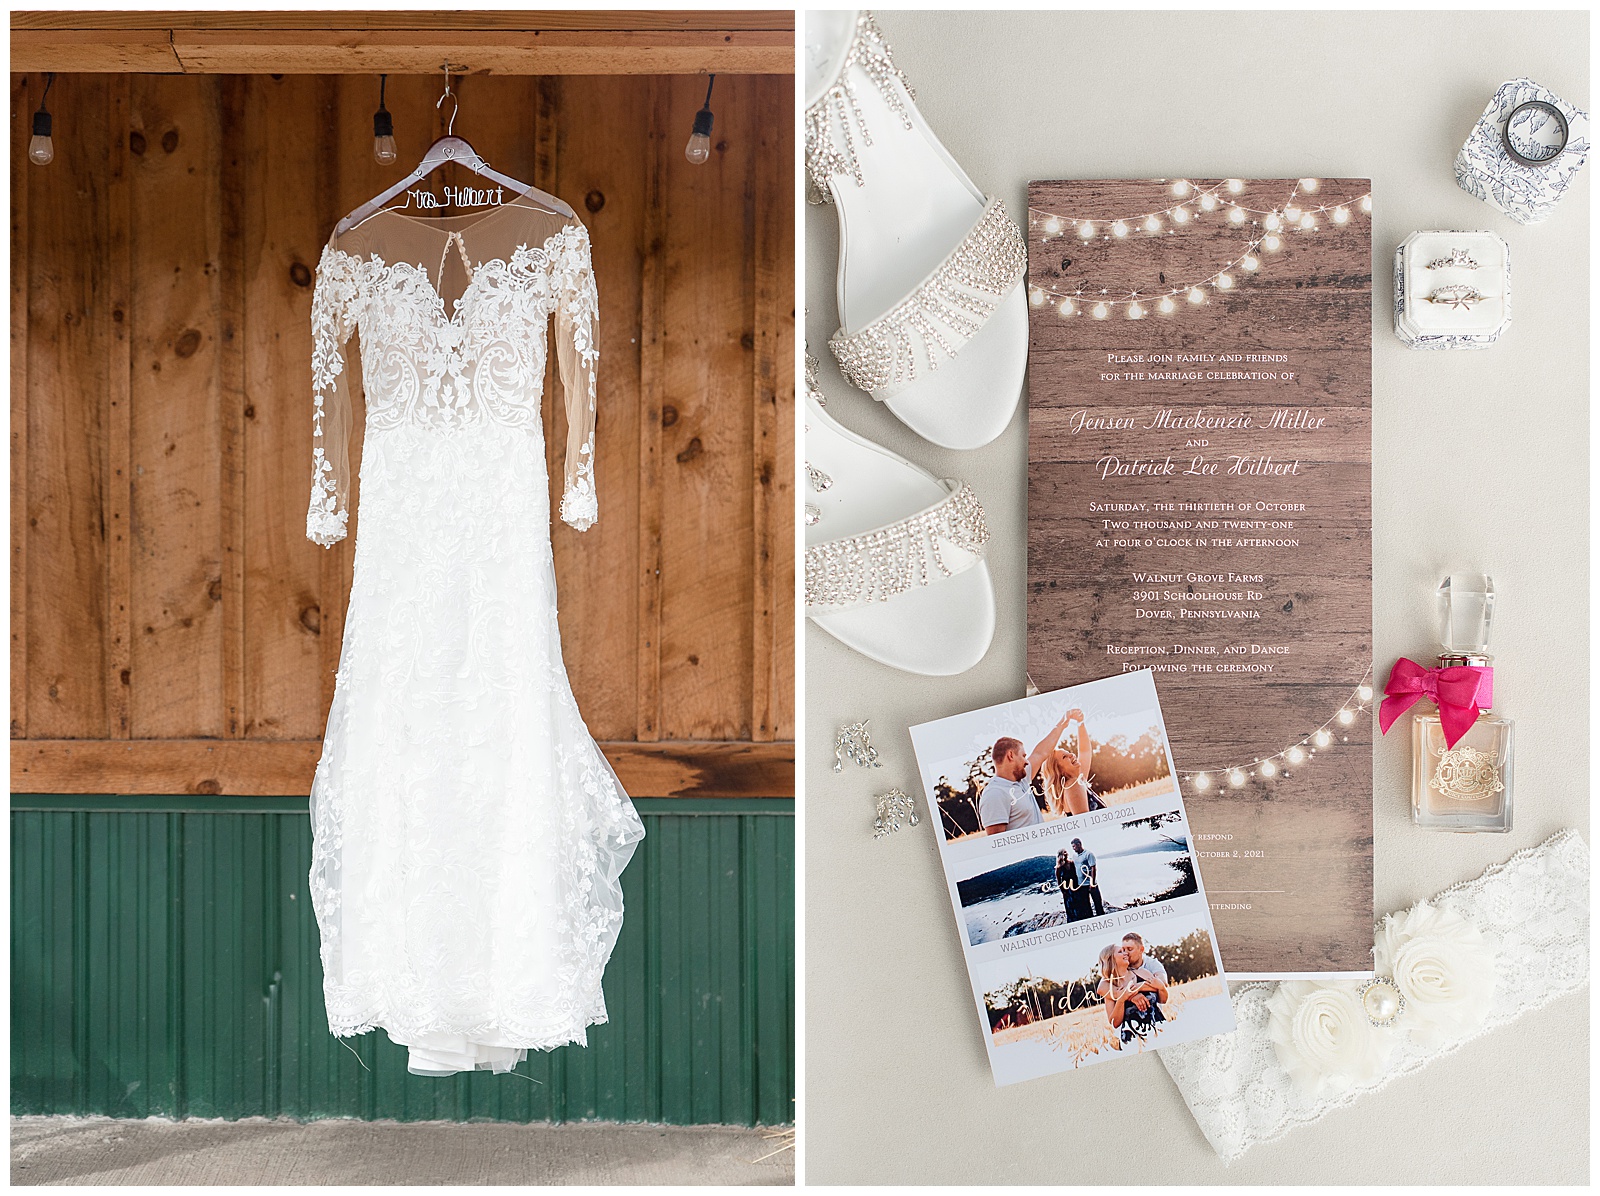 beautiful long-sleeved lacy white wedding gown hanging from wooden barn beam